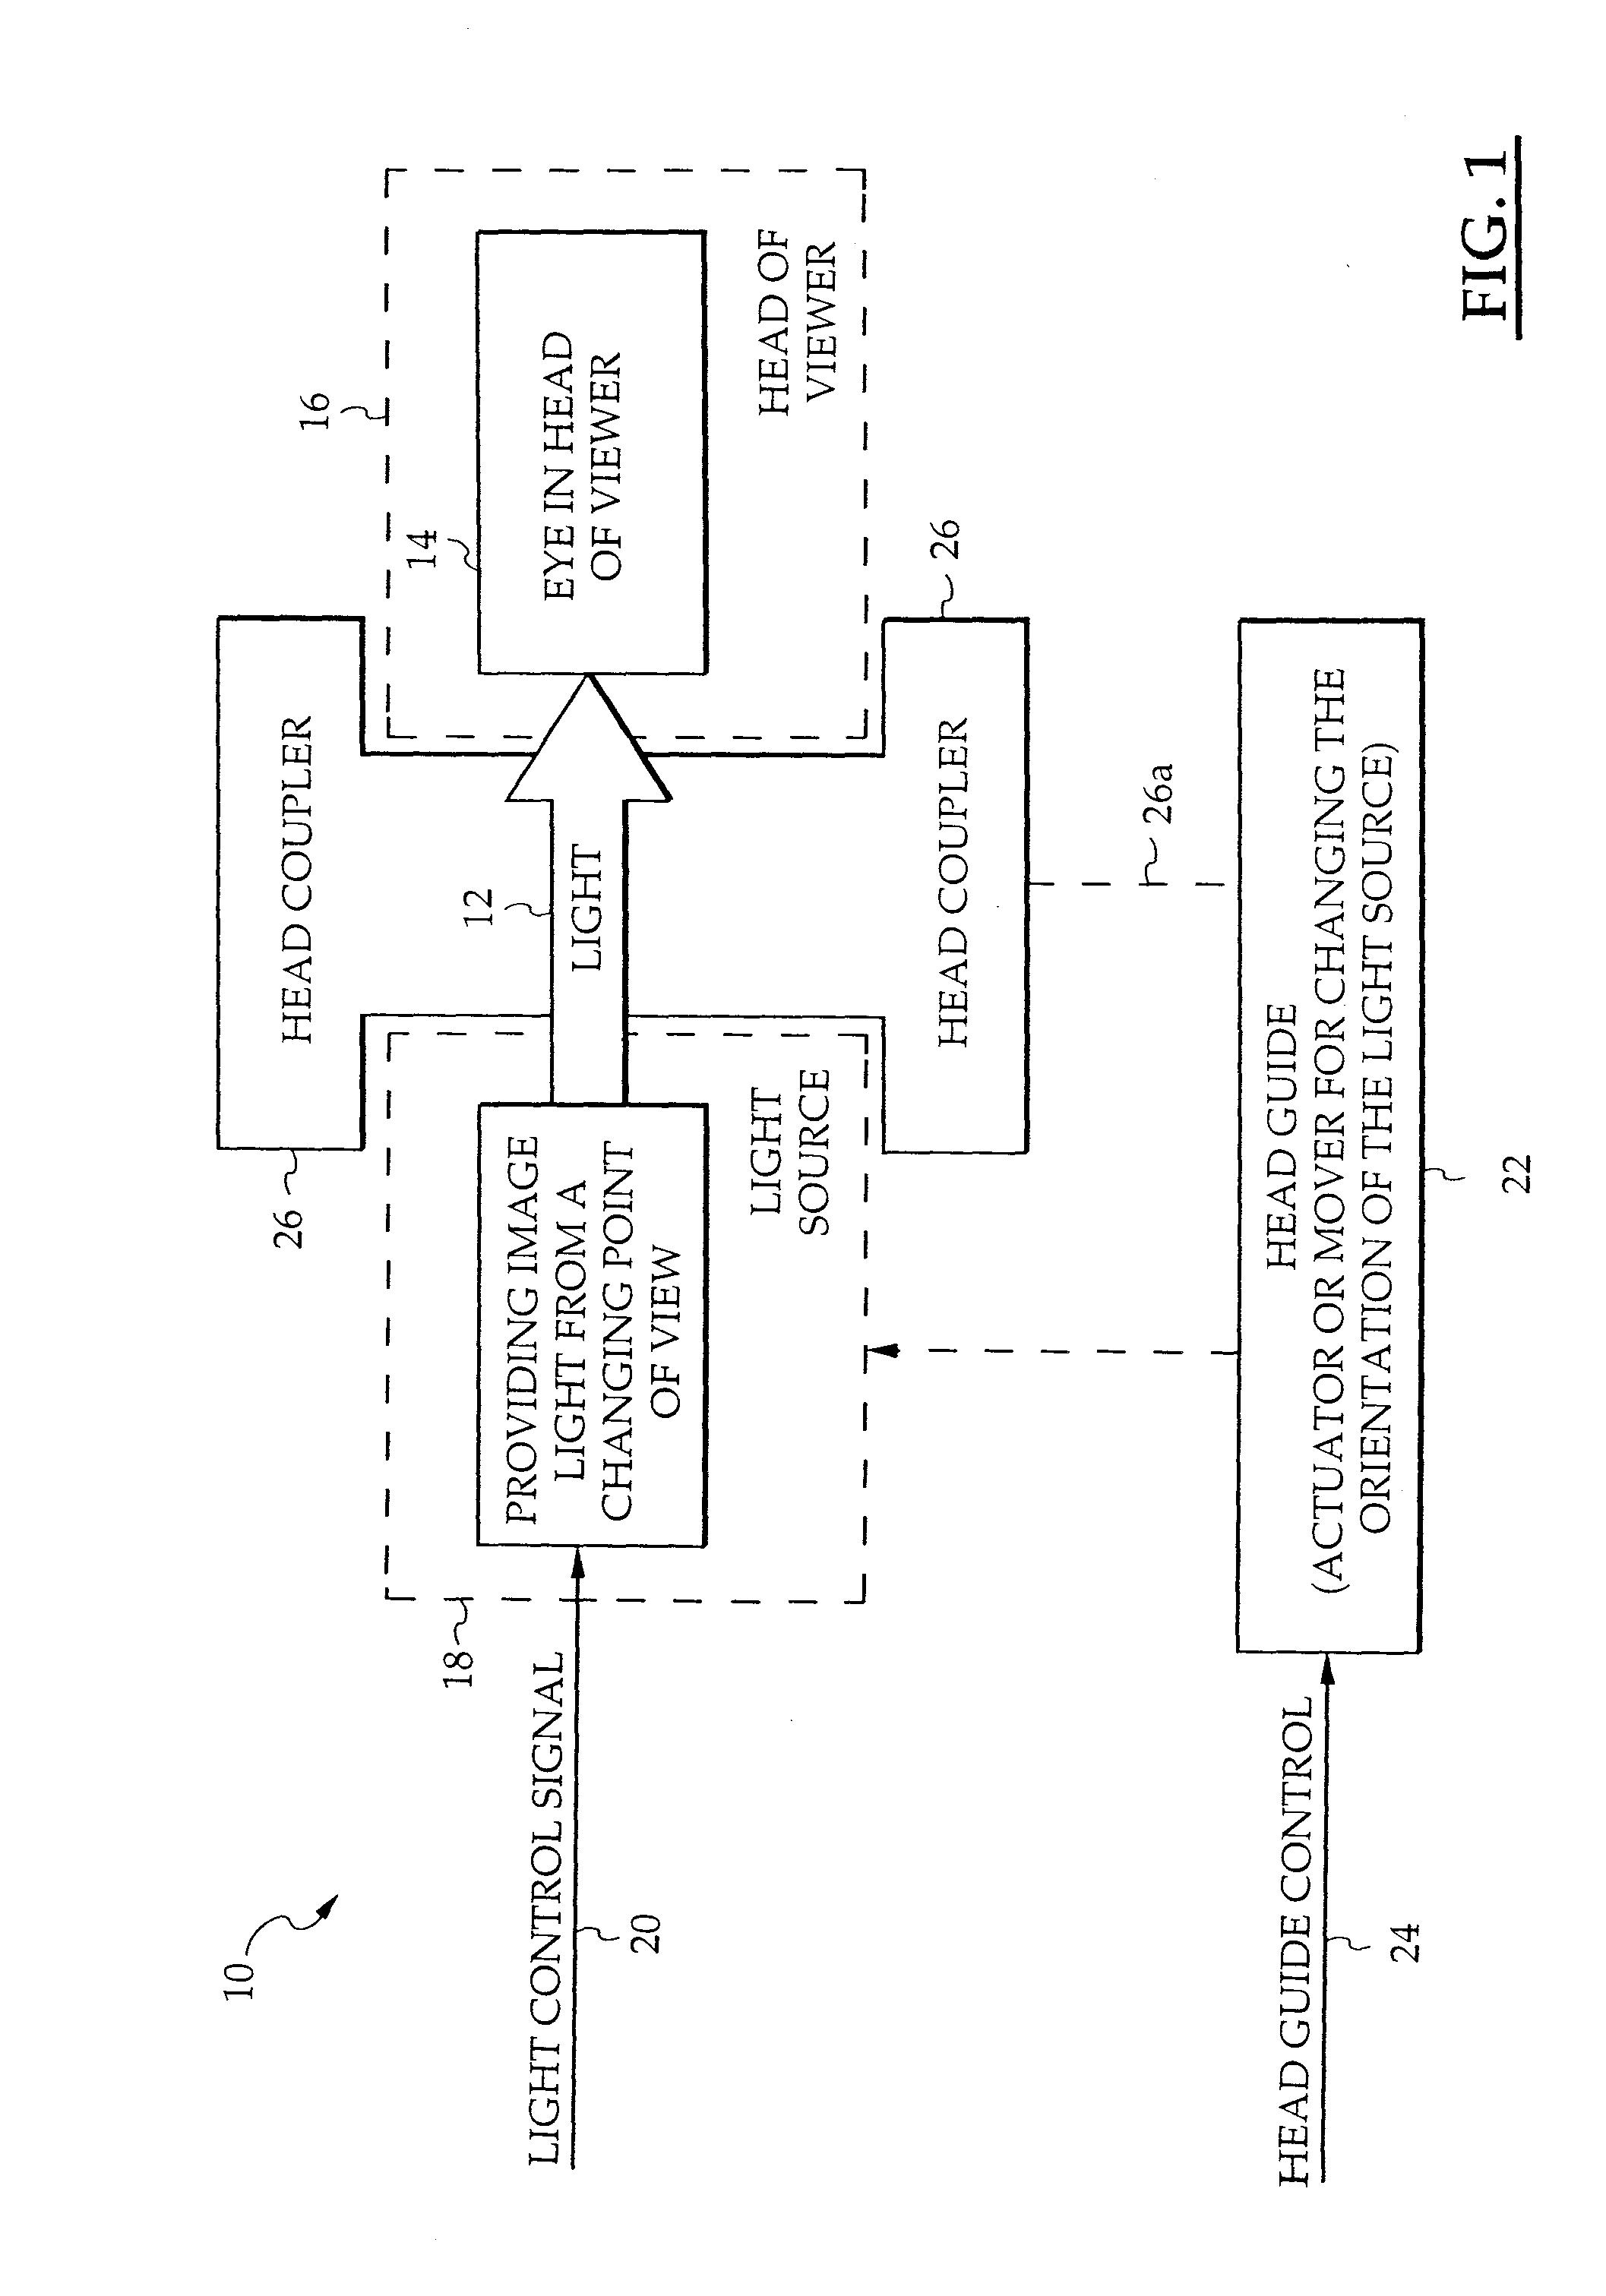 Storage medium for storing a signal having successive images for subsequent playback and a method for forming such a signal for storage on such a storage medium